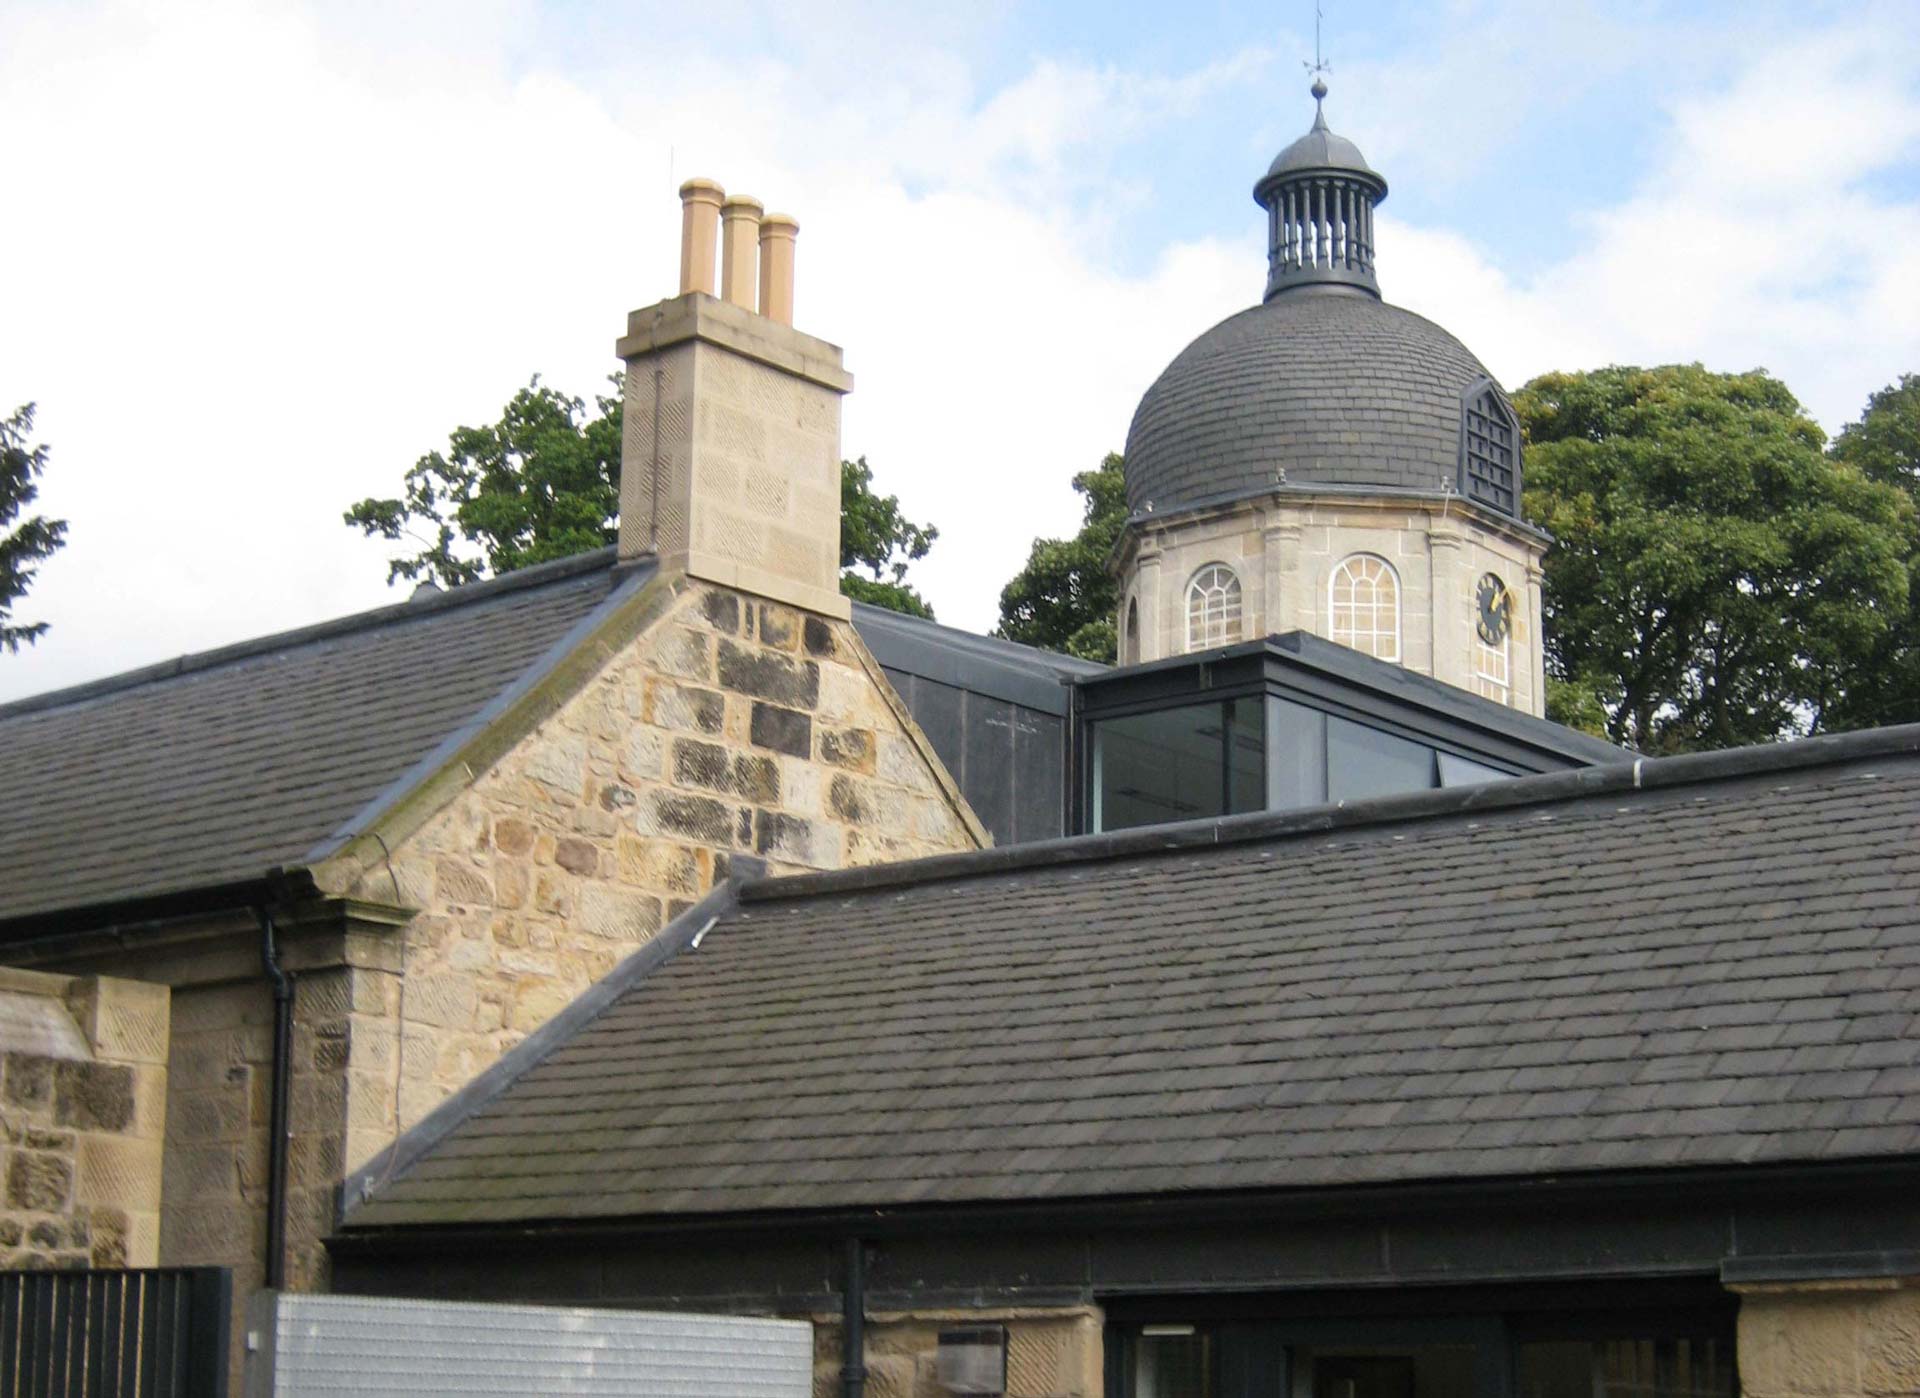 A close up image of the roof top of a converted stables building made from stone, with the view of a clock tower in the background